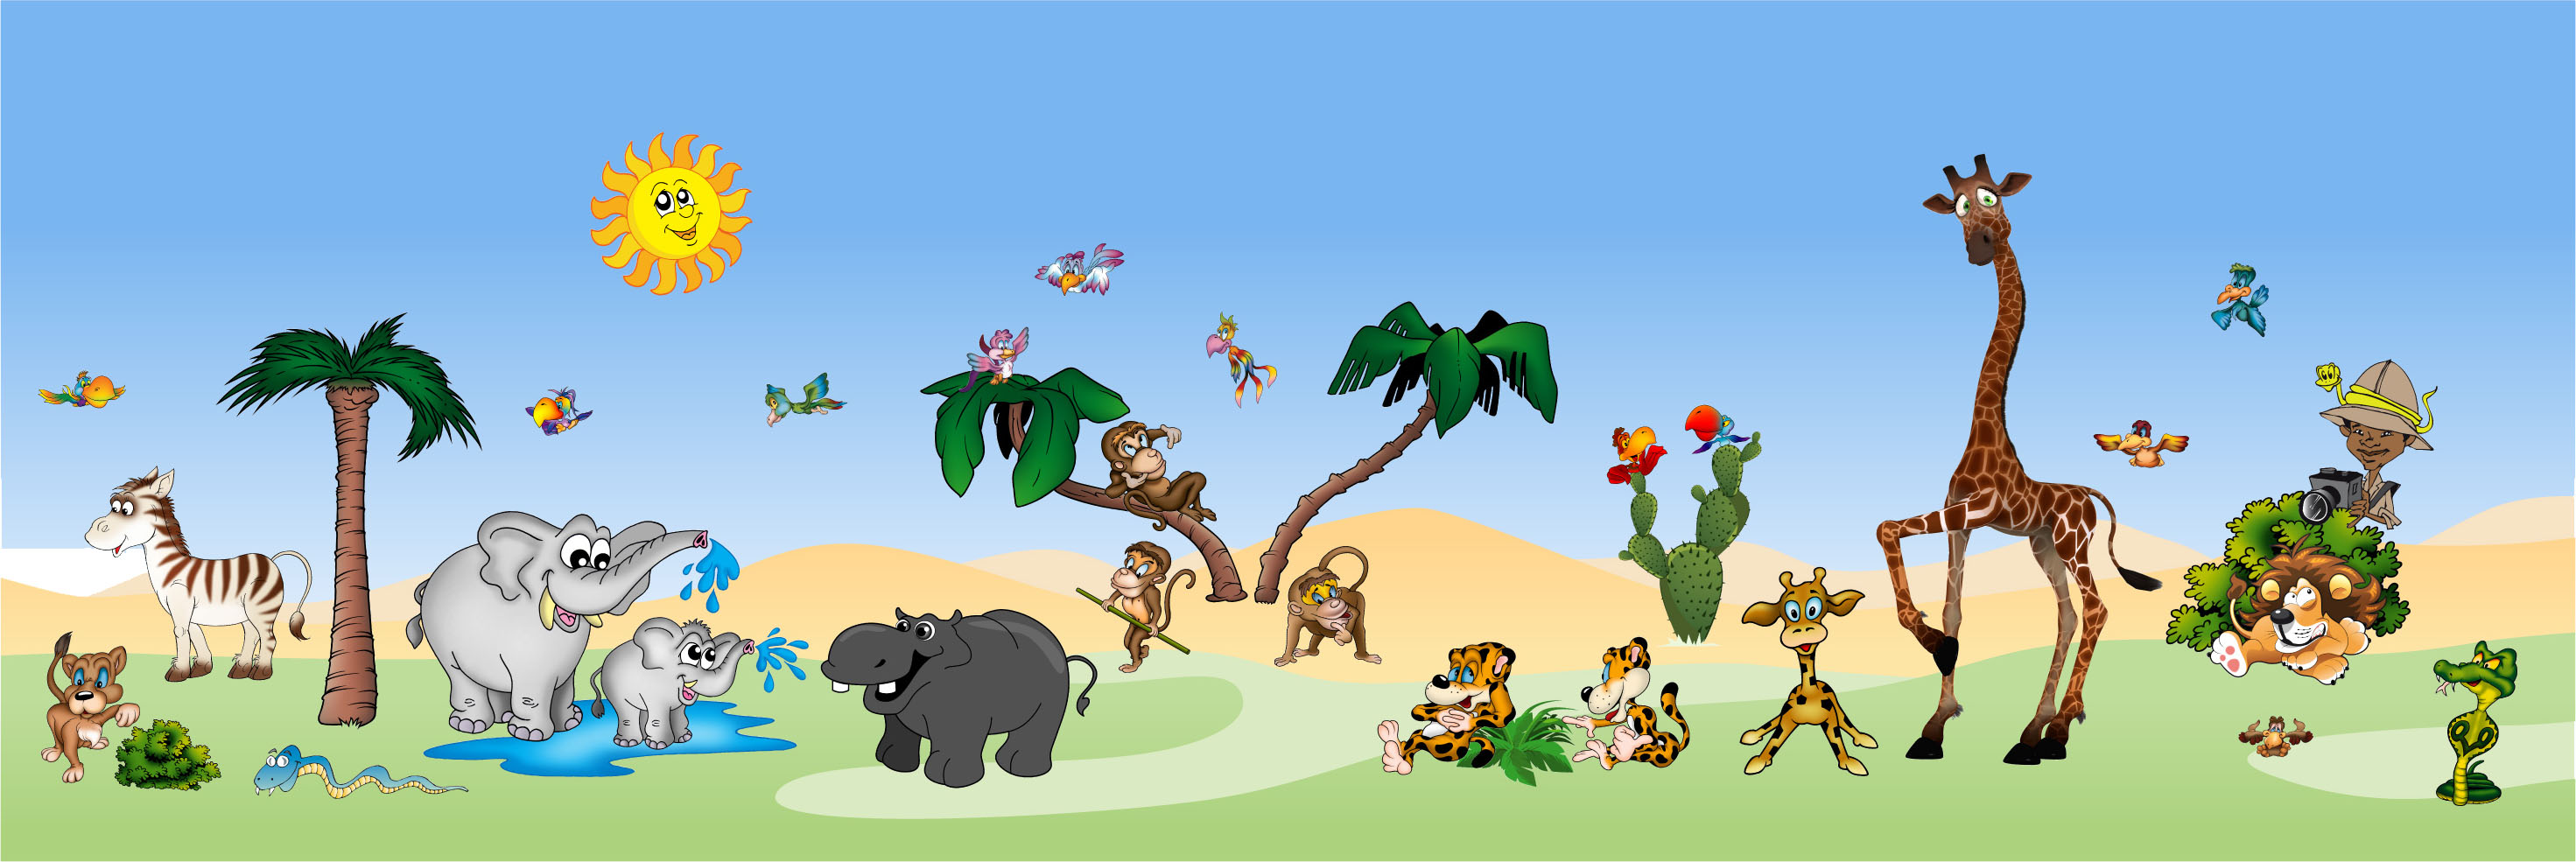 jungle animals clipart pictures - photo #47